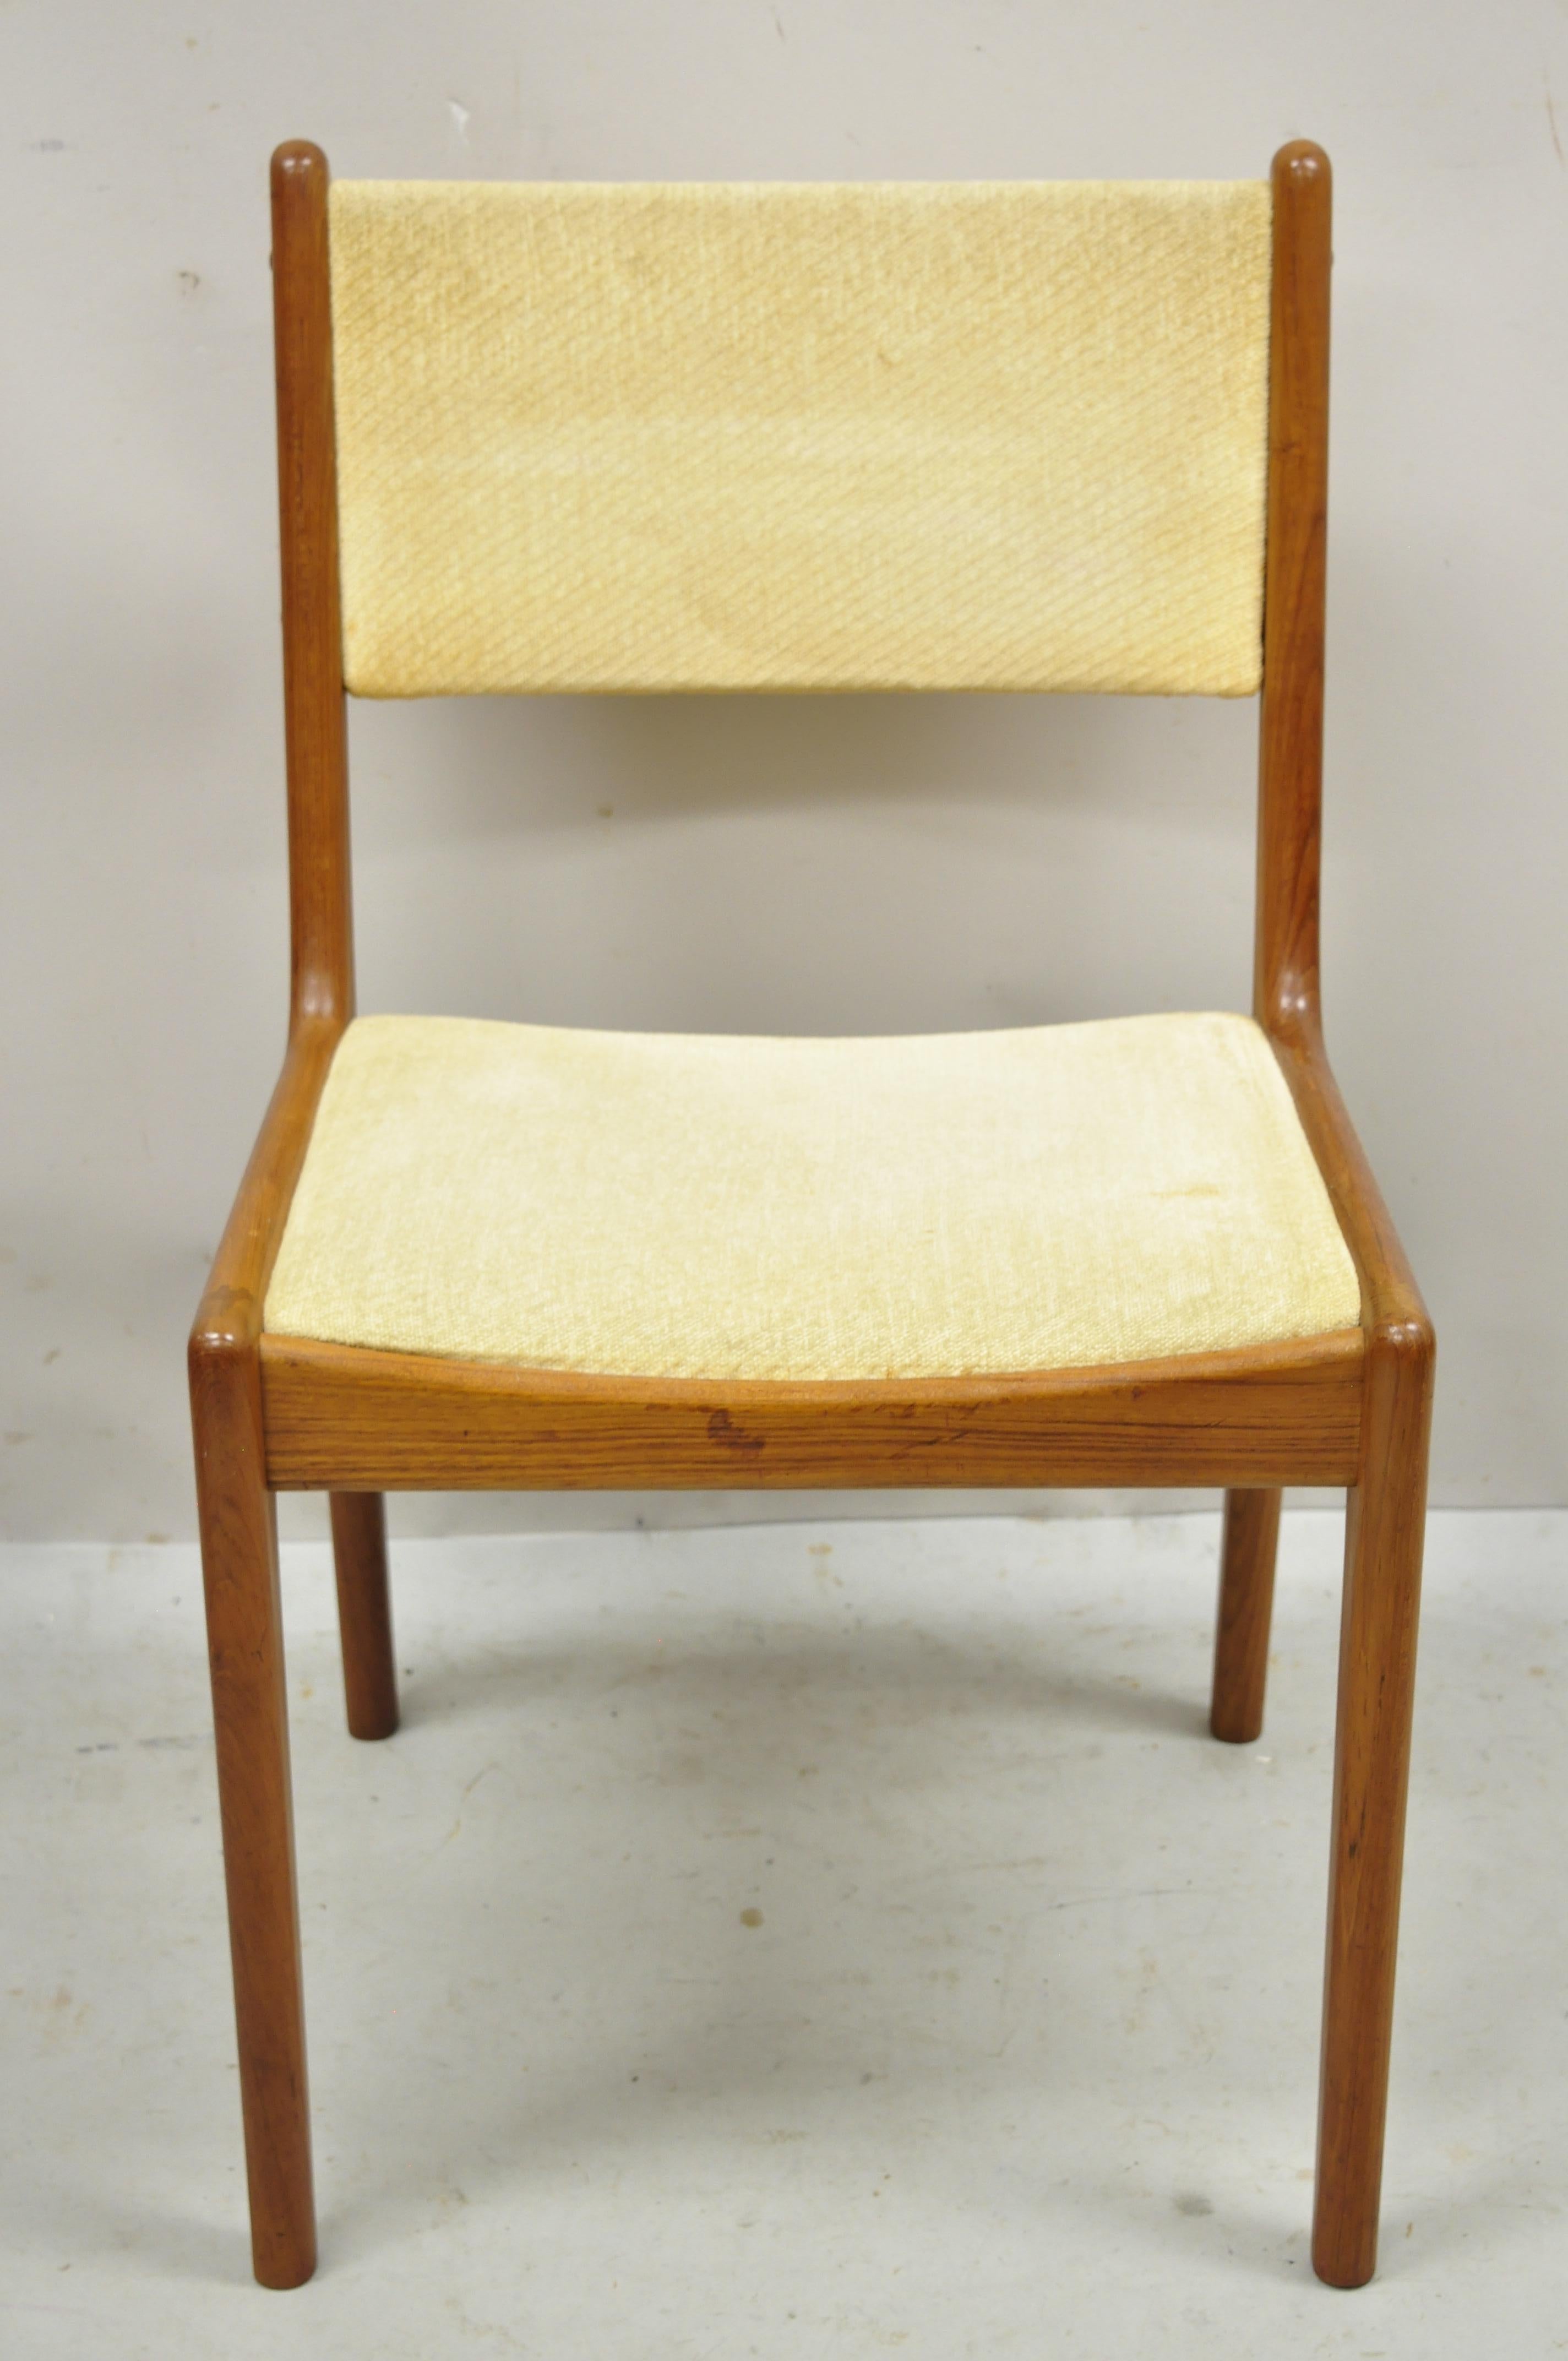 Vintage Mid-Century Modern Danish style teak wood dining chair by Sun Furniture. Item features solid wood construction, beautiful wood grain, original label, tapered legs, very nice vintage item, sleek sculptural form. Circa Mid to Late 20th